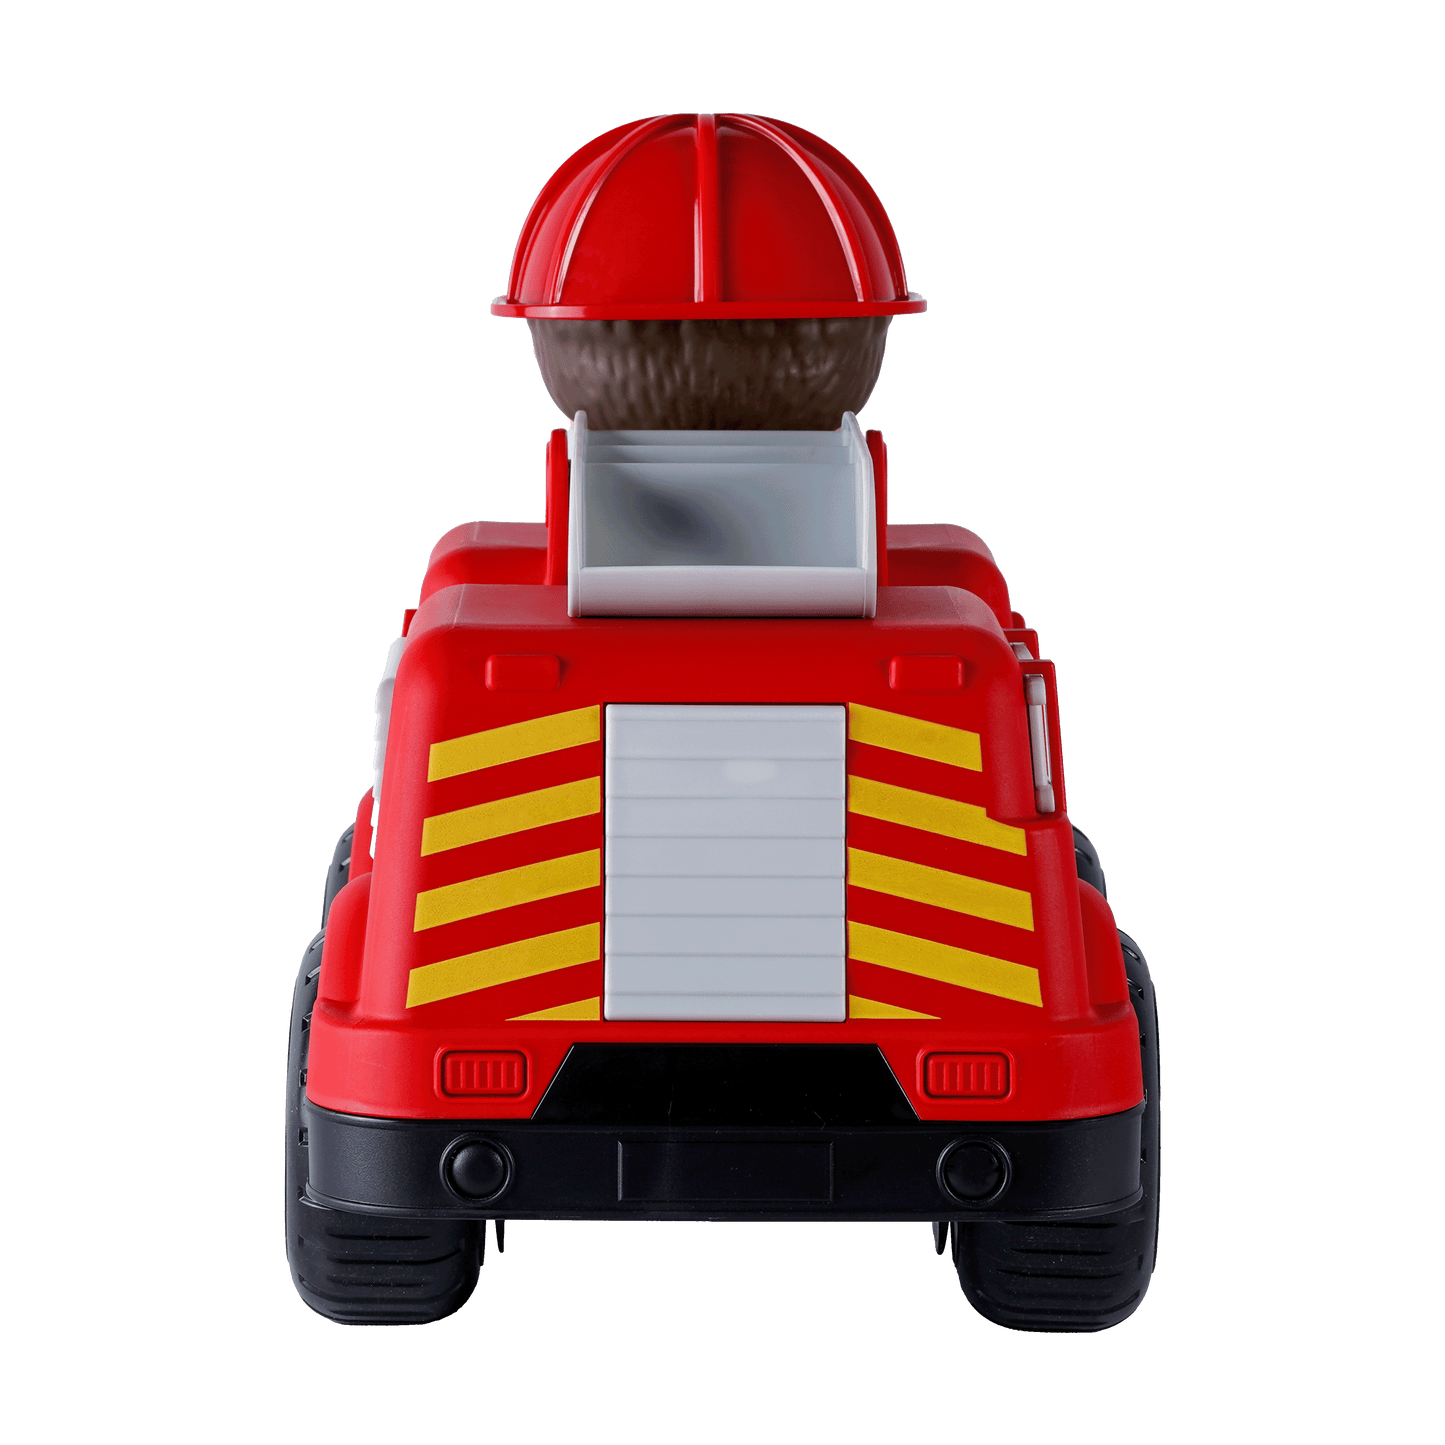 Fire Truck with choice of Figure